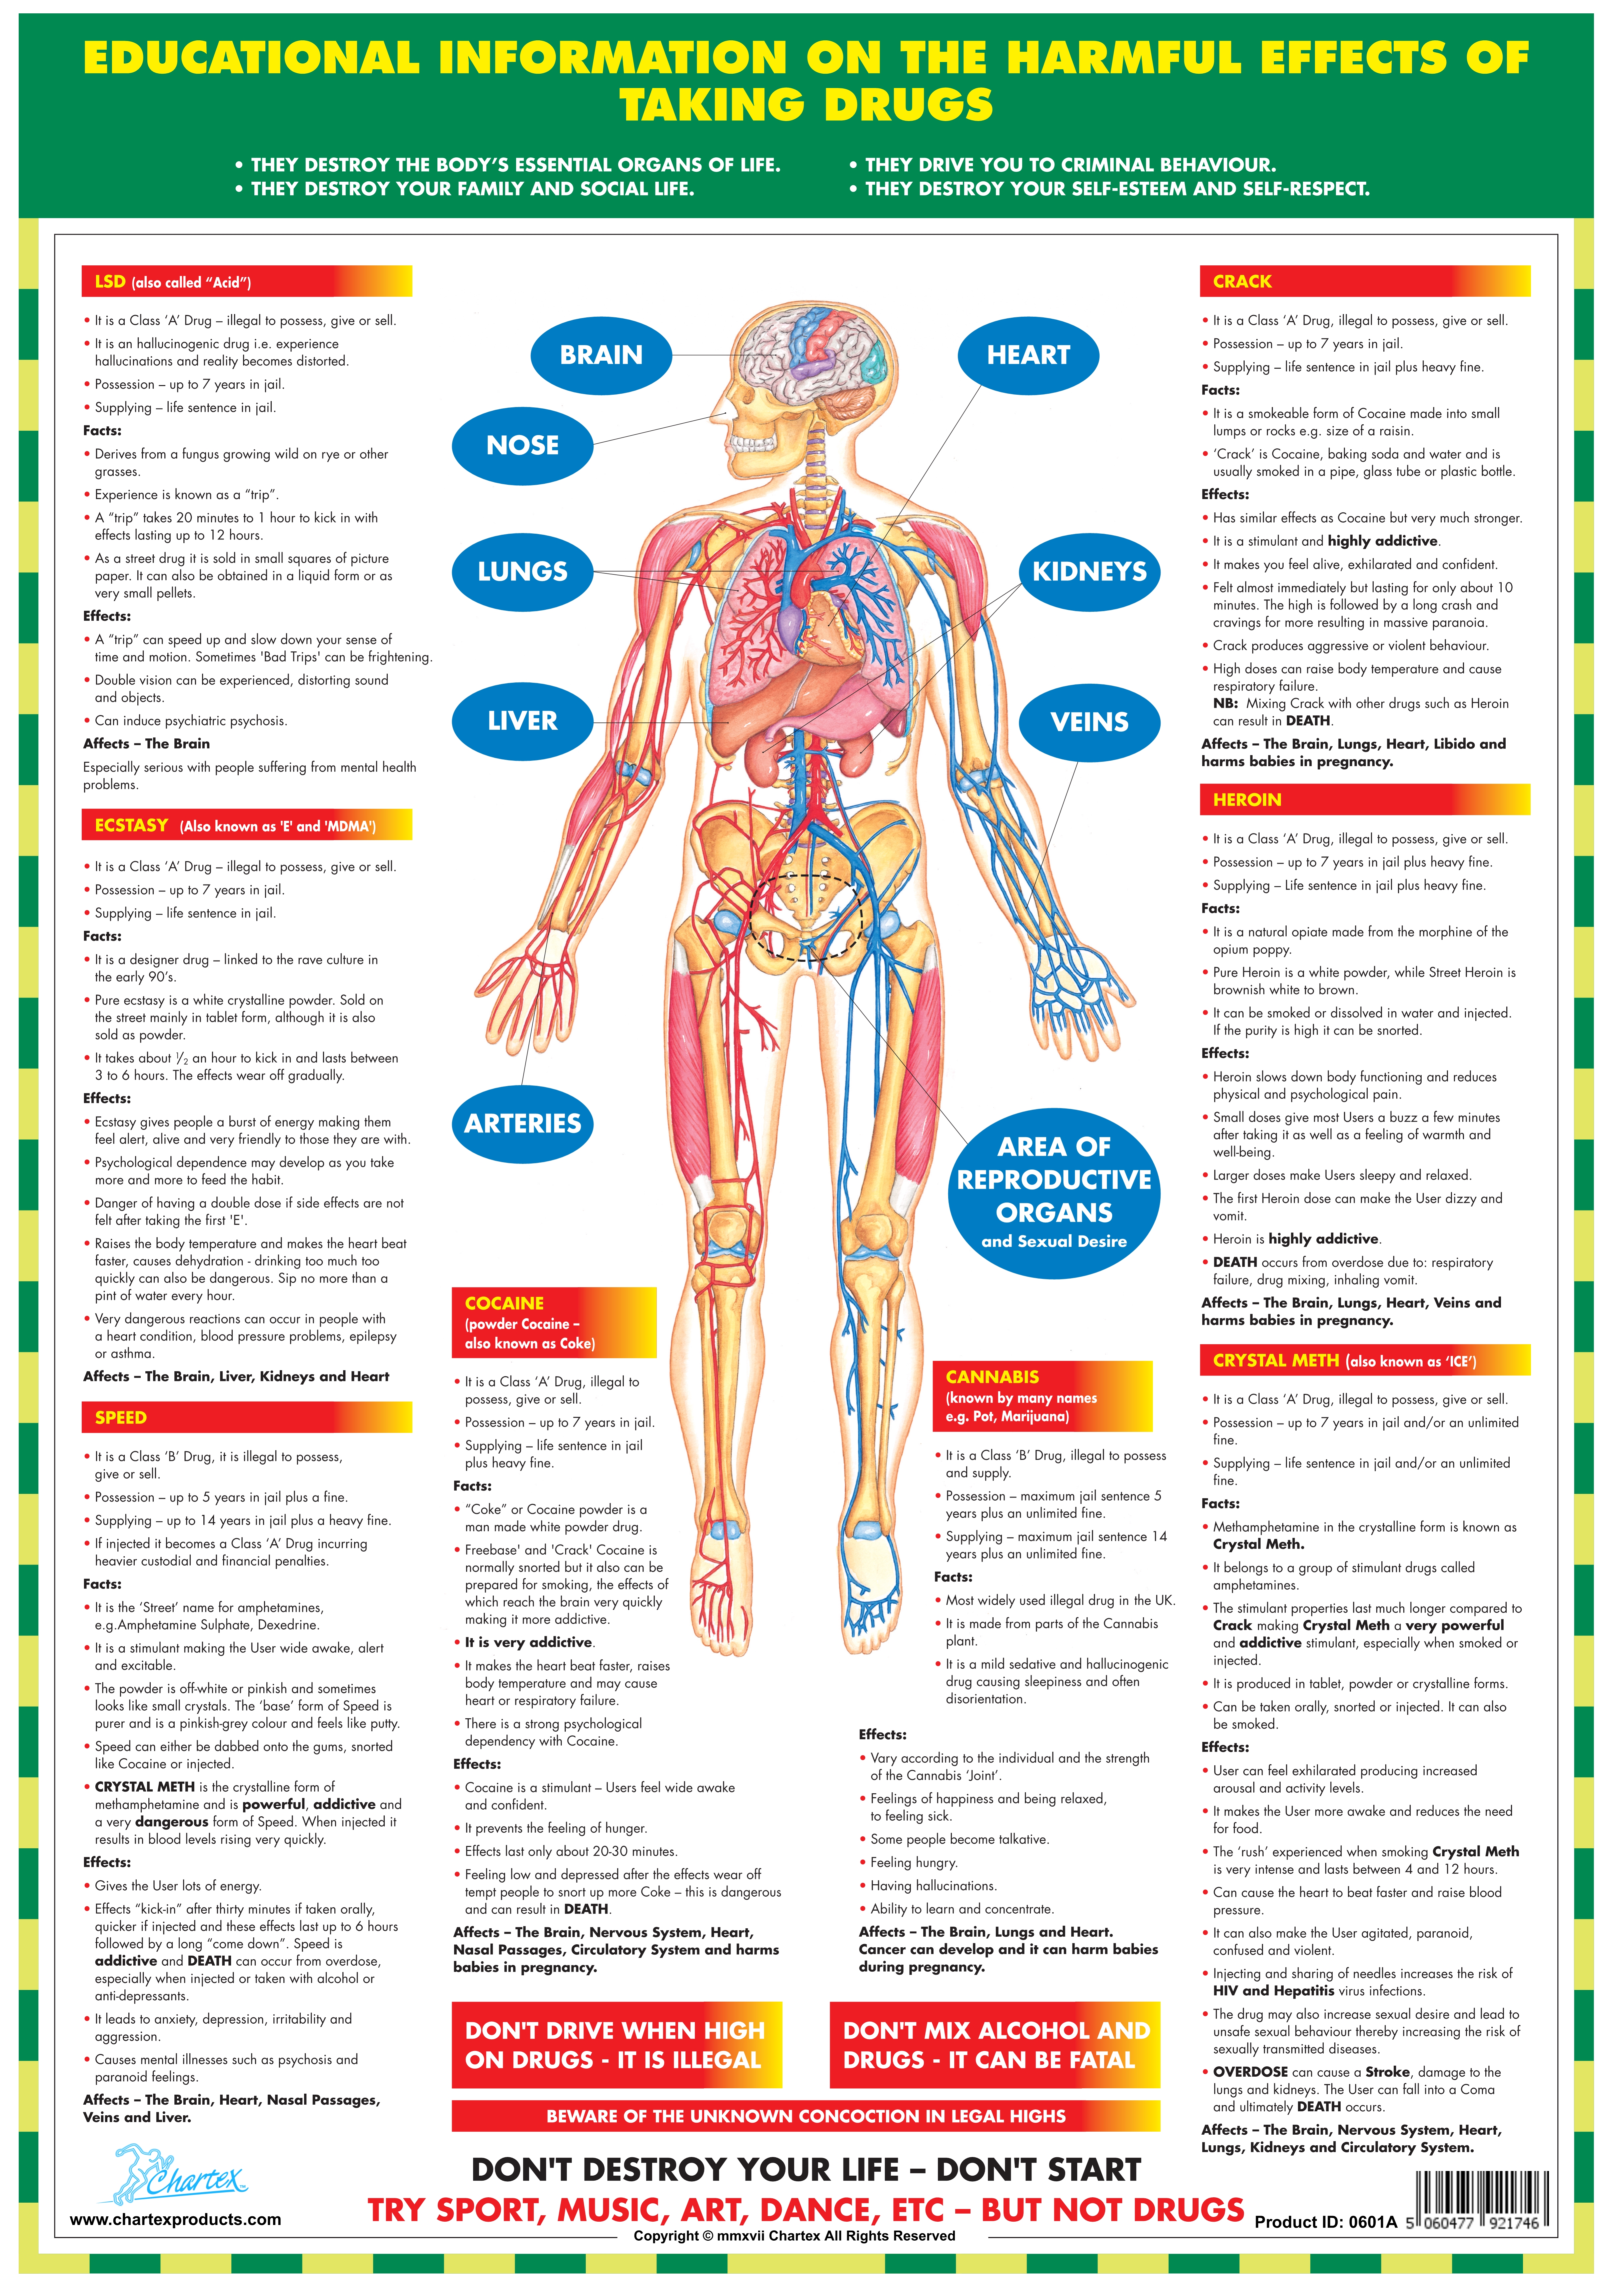 Effects of Taking Drugs - A3 Chart